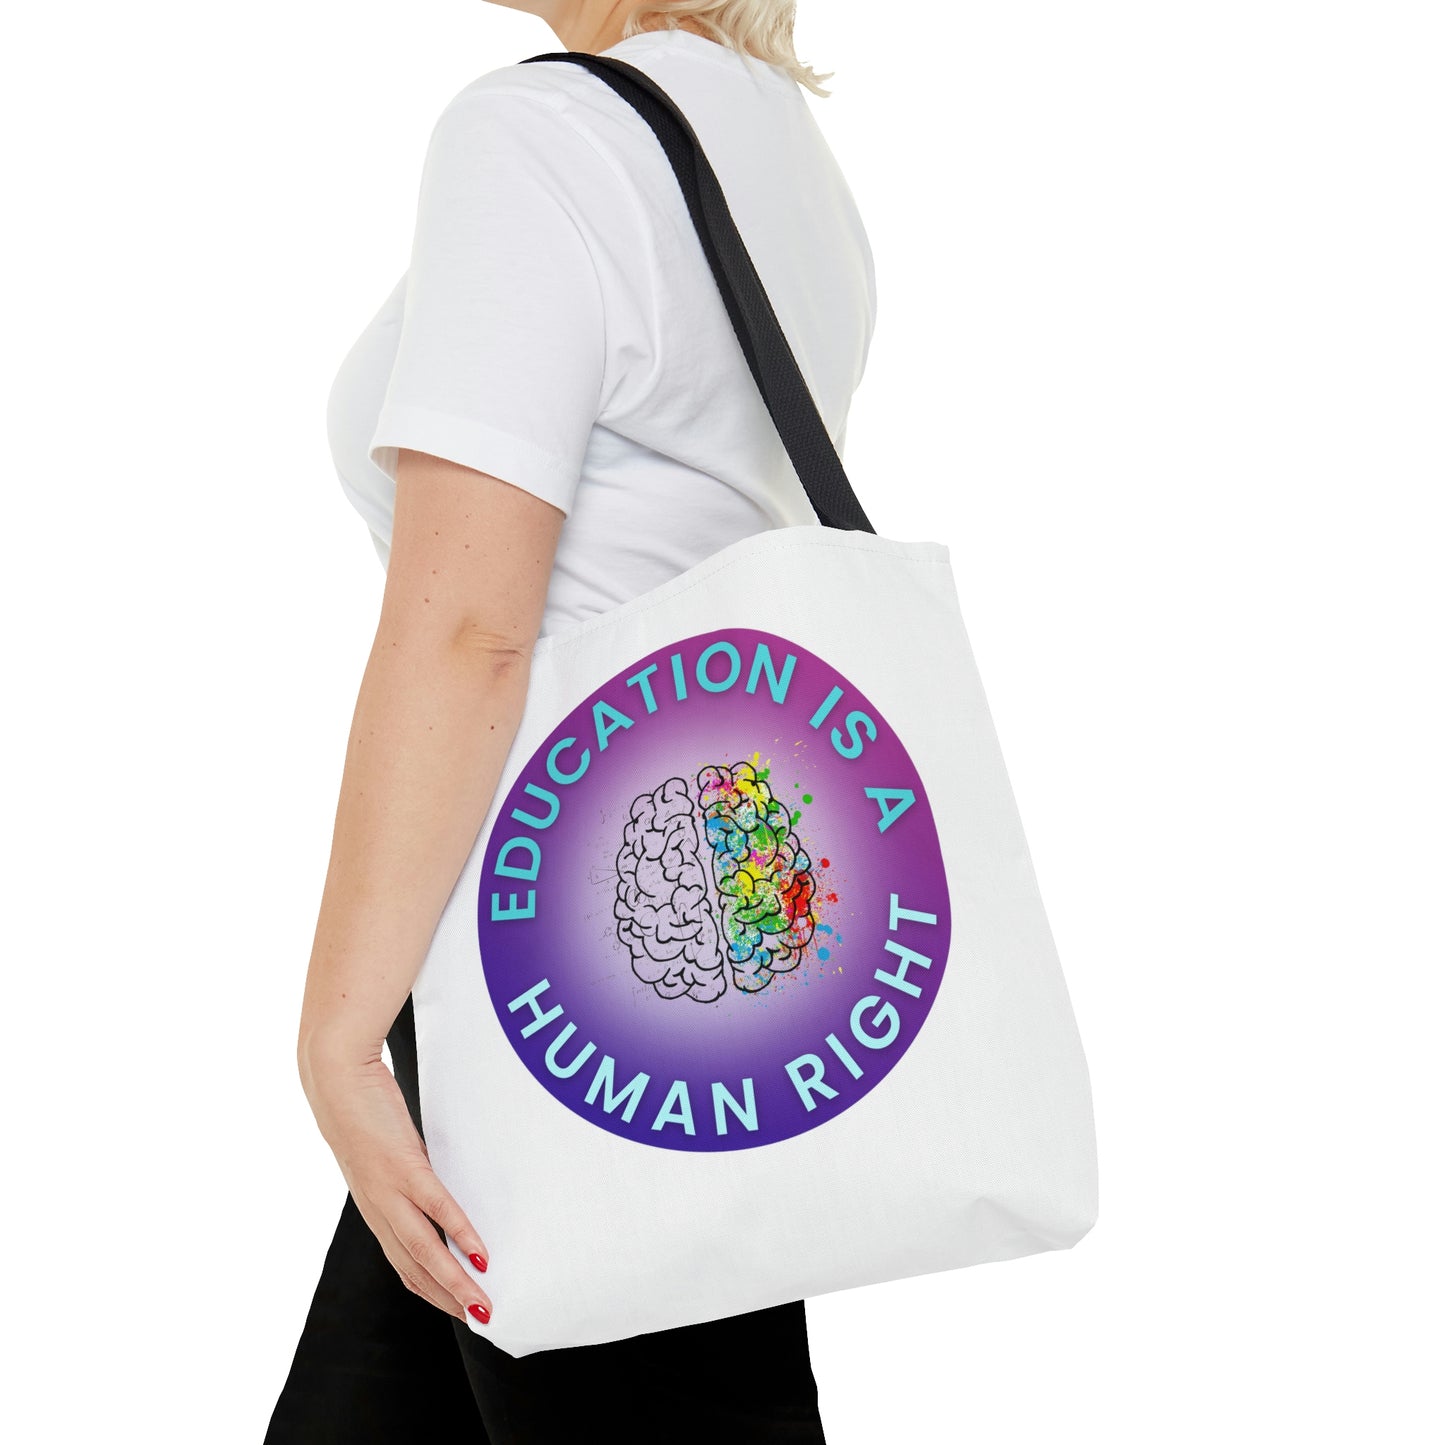 Education is a Human Right AOP Tote Bag in 3 sizes